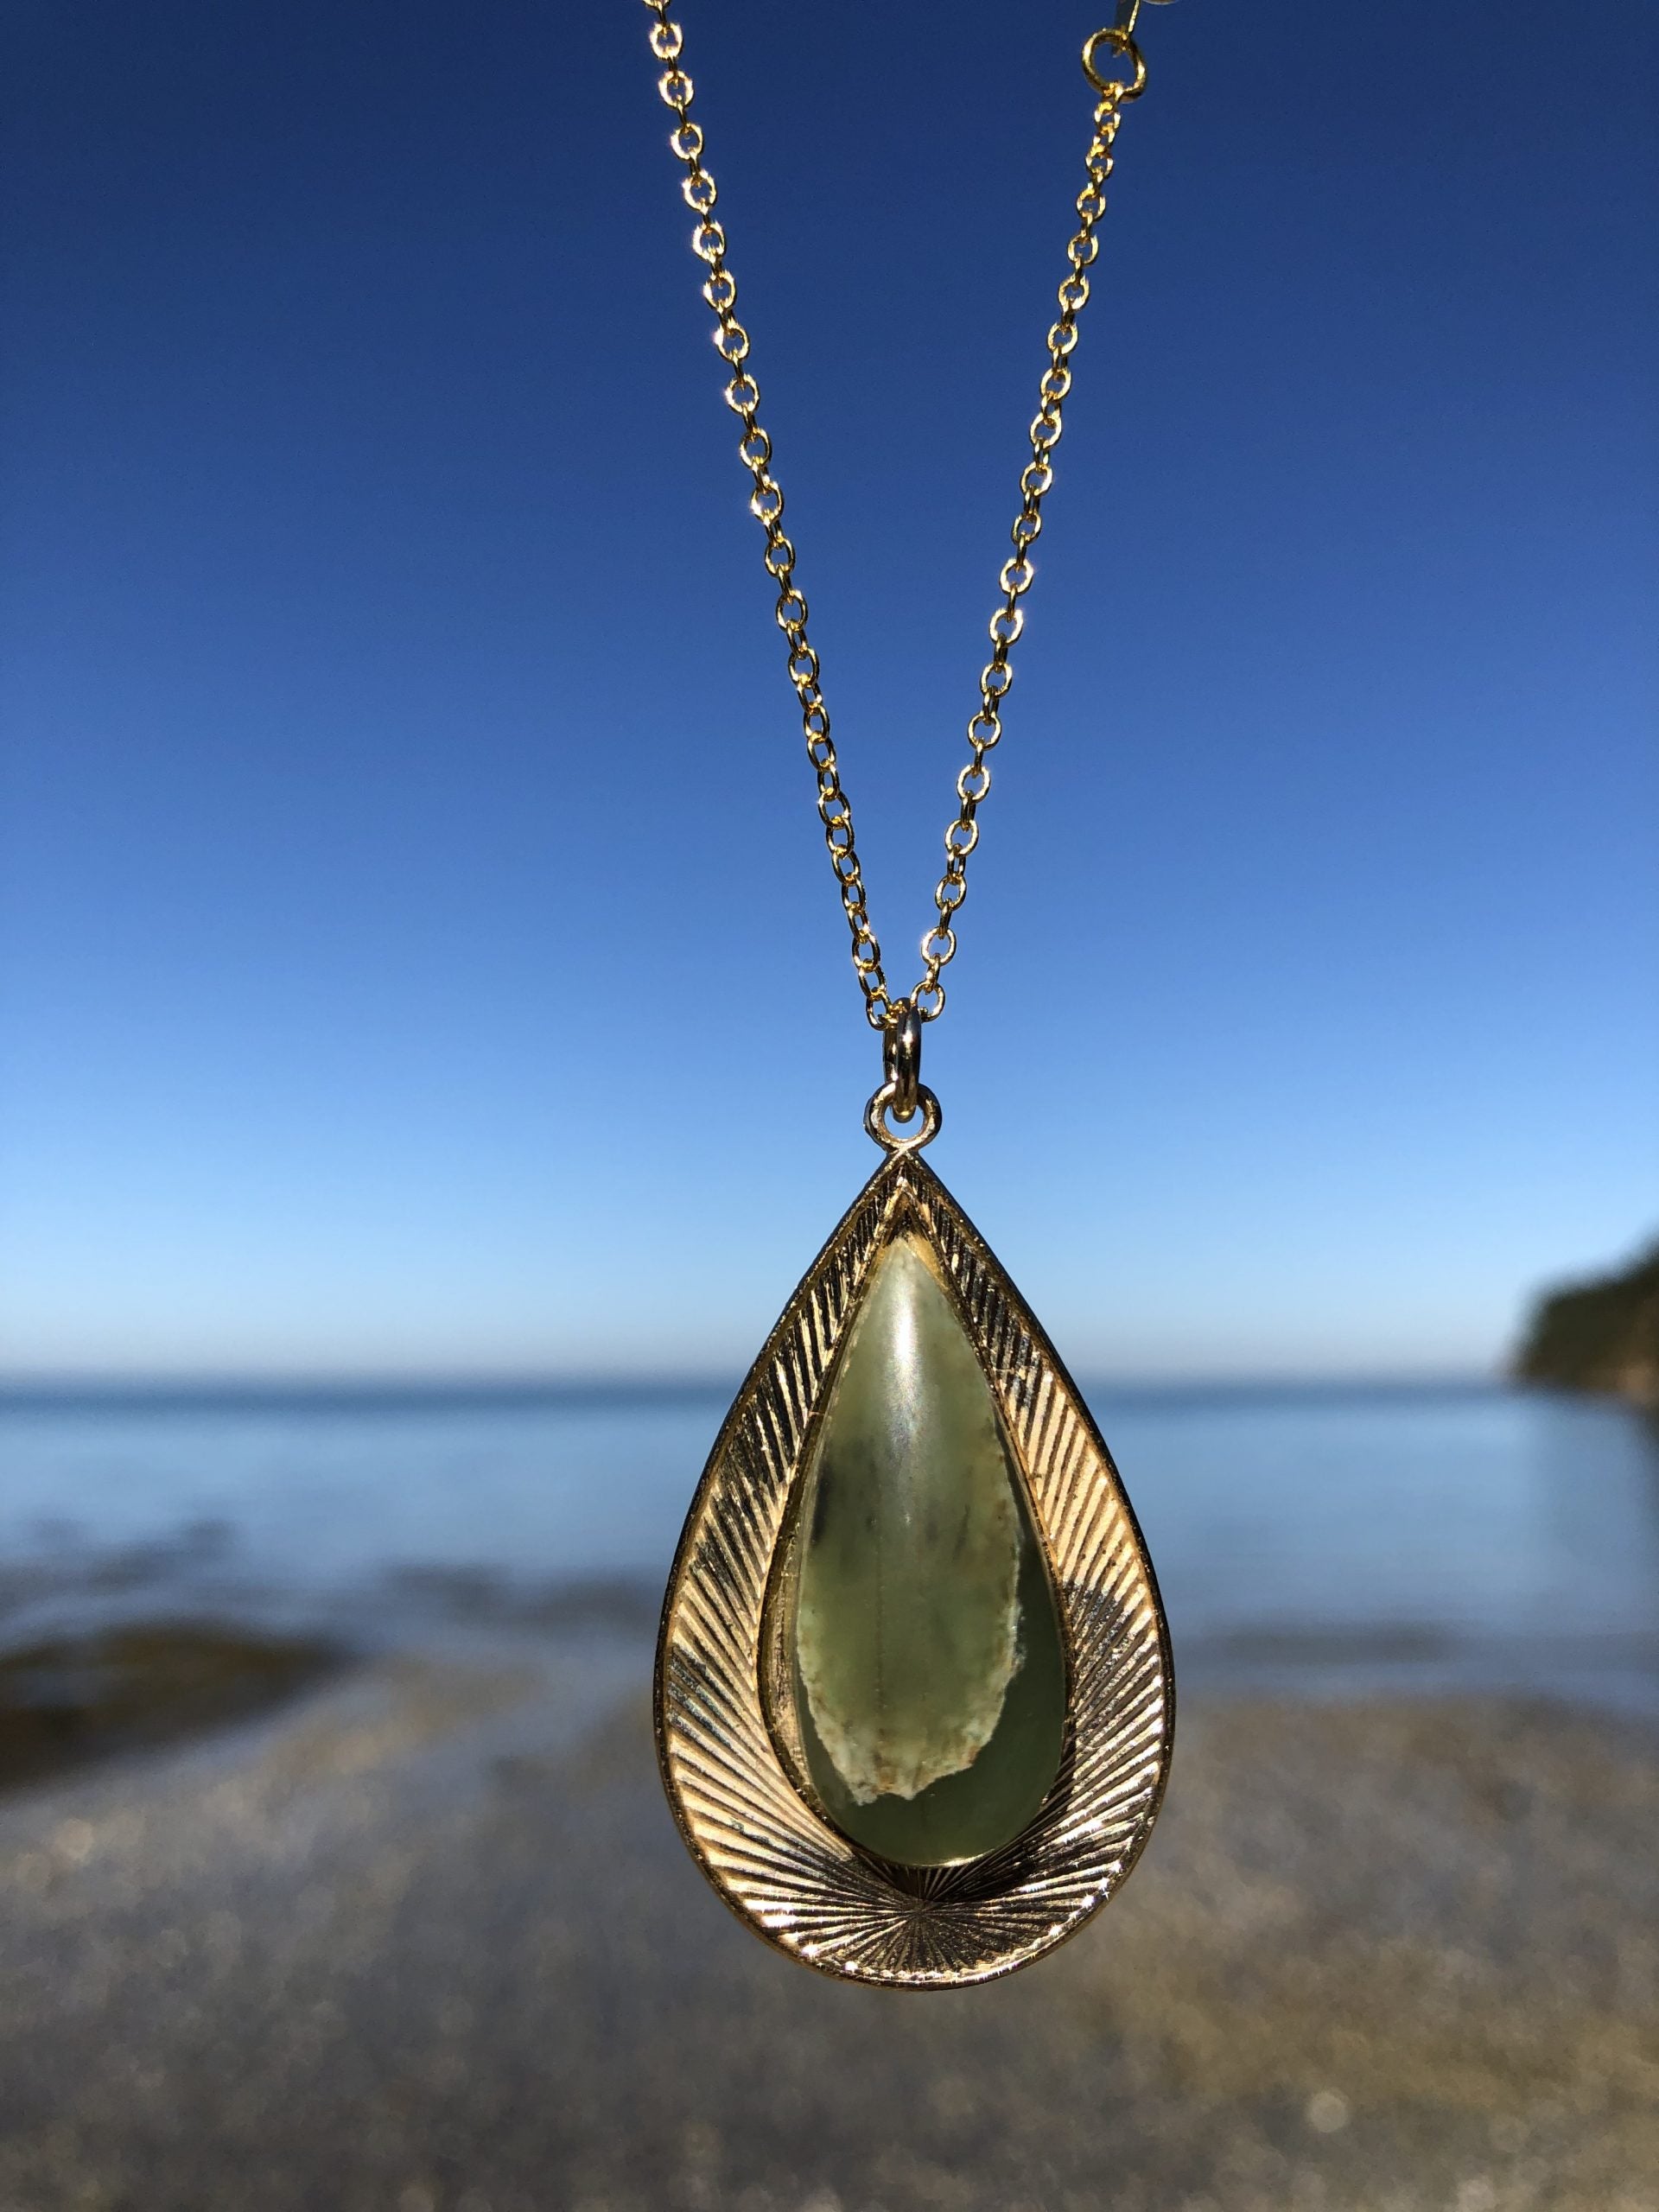 Necklace with natural Botswana Jade (green aventurine) stone, hand polished to a 32x12mm teardrop cabochon and set in a gold plated setting with 19 inch chain, on beach